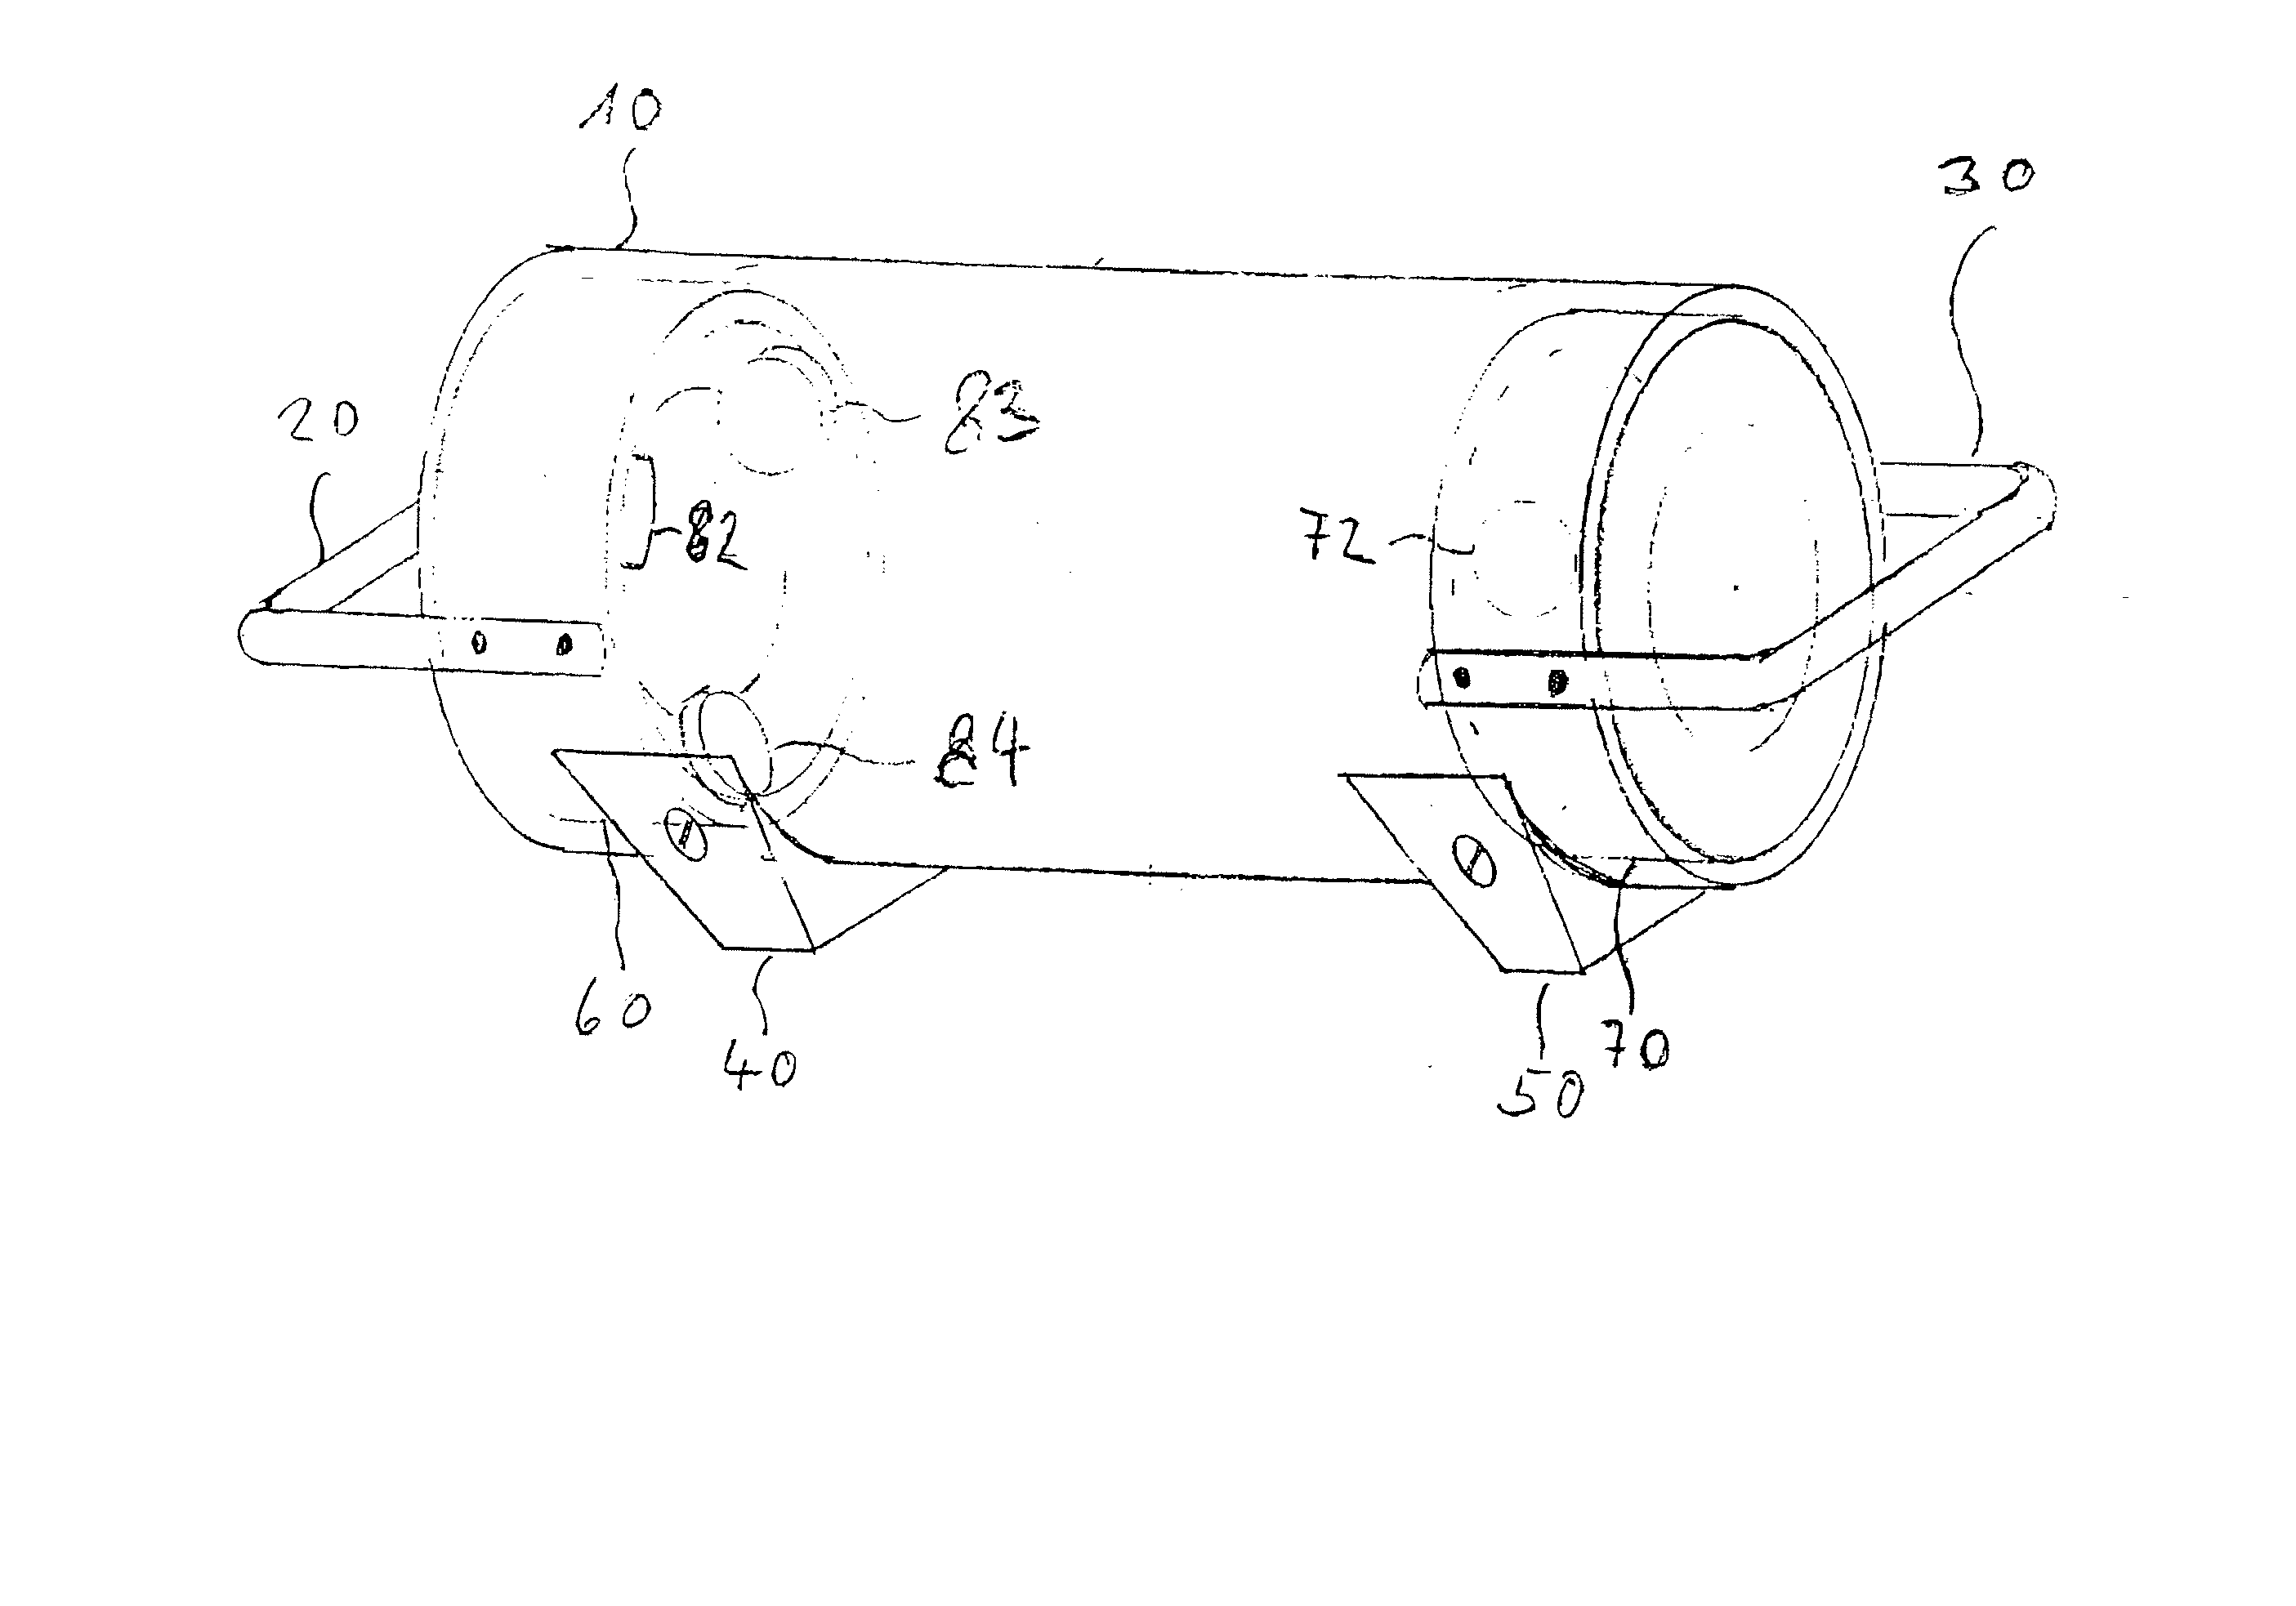 Shock Isolation System for an Inertial Sensor Array